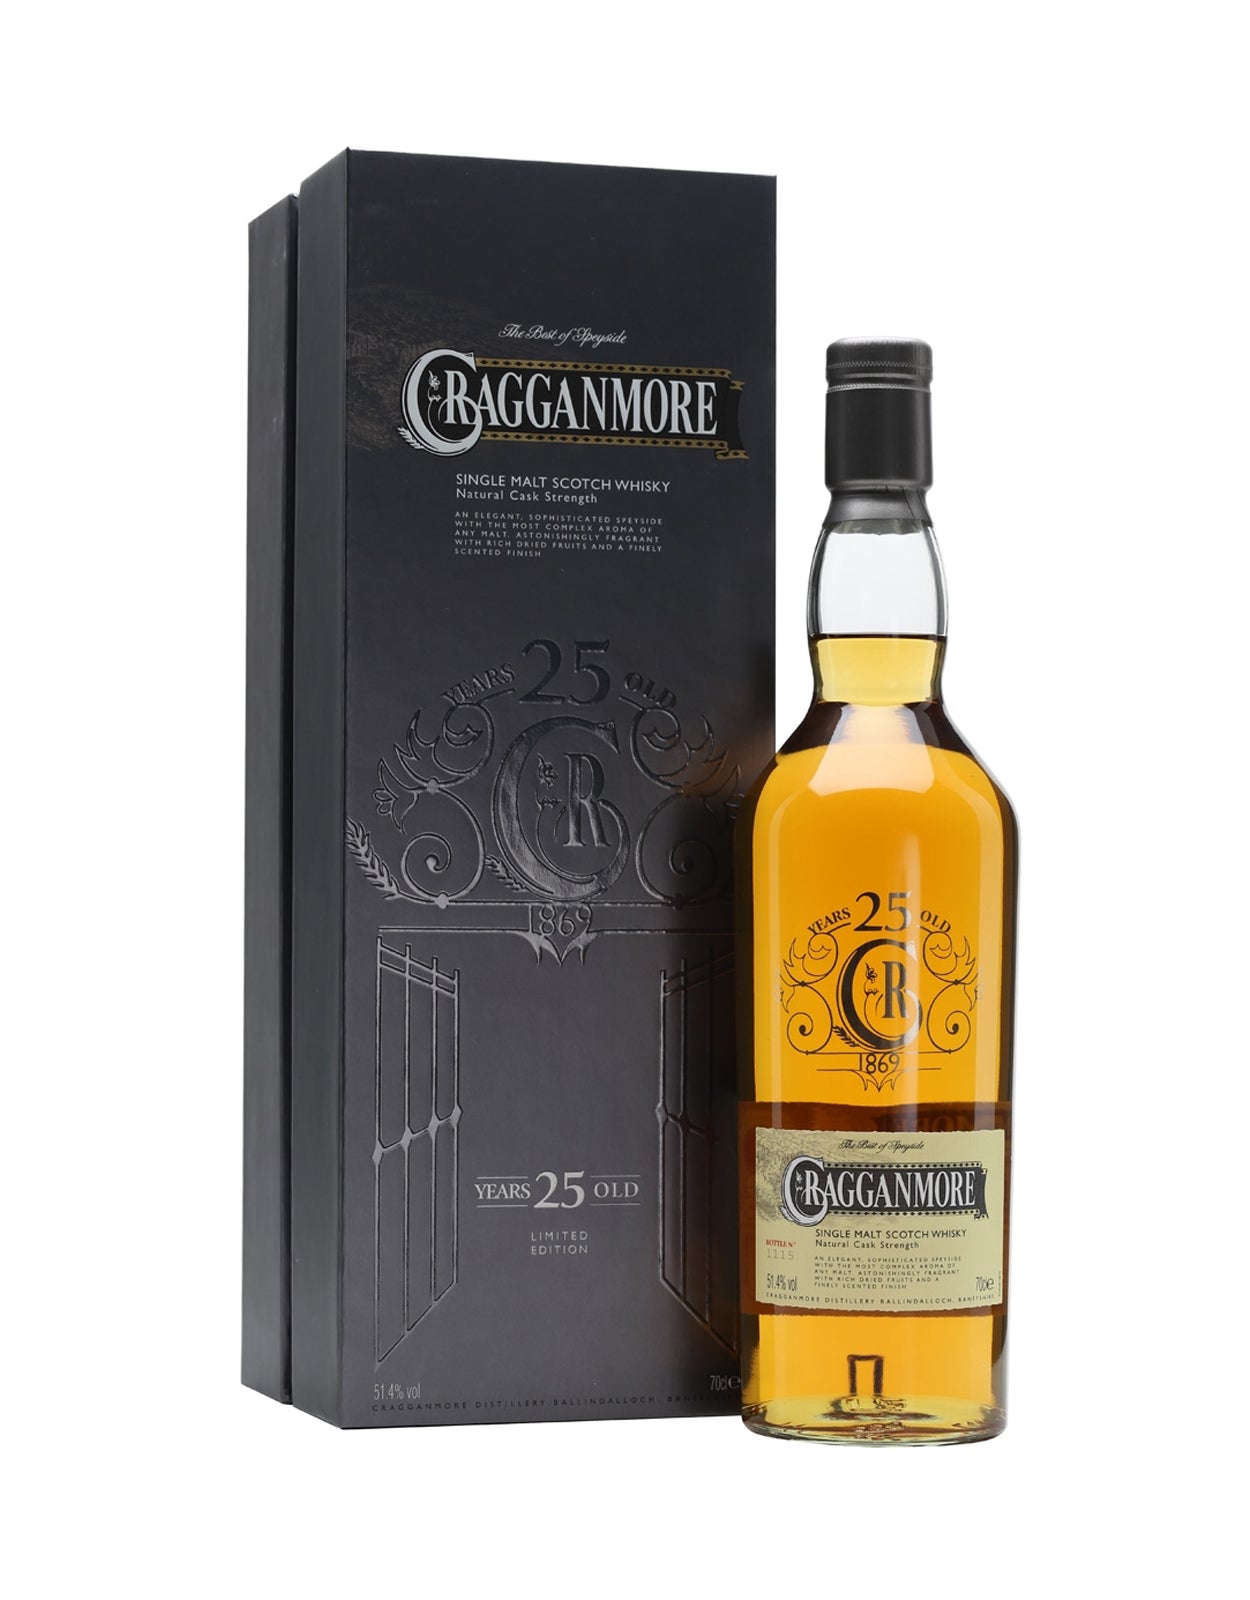 Cragganmore 25 Year Old